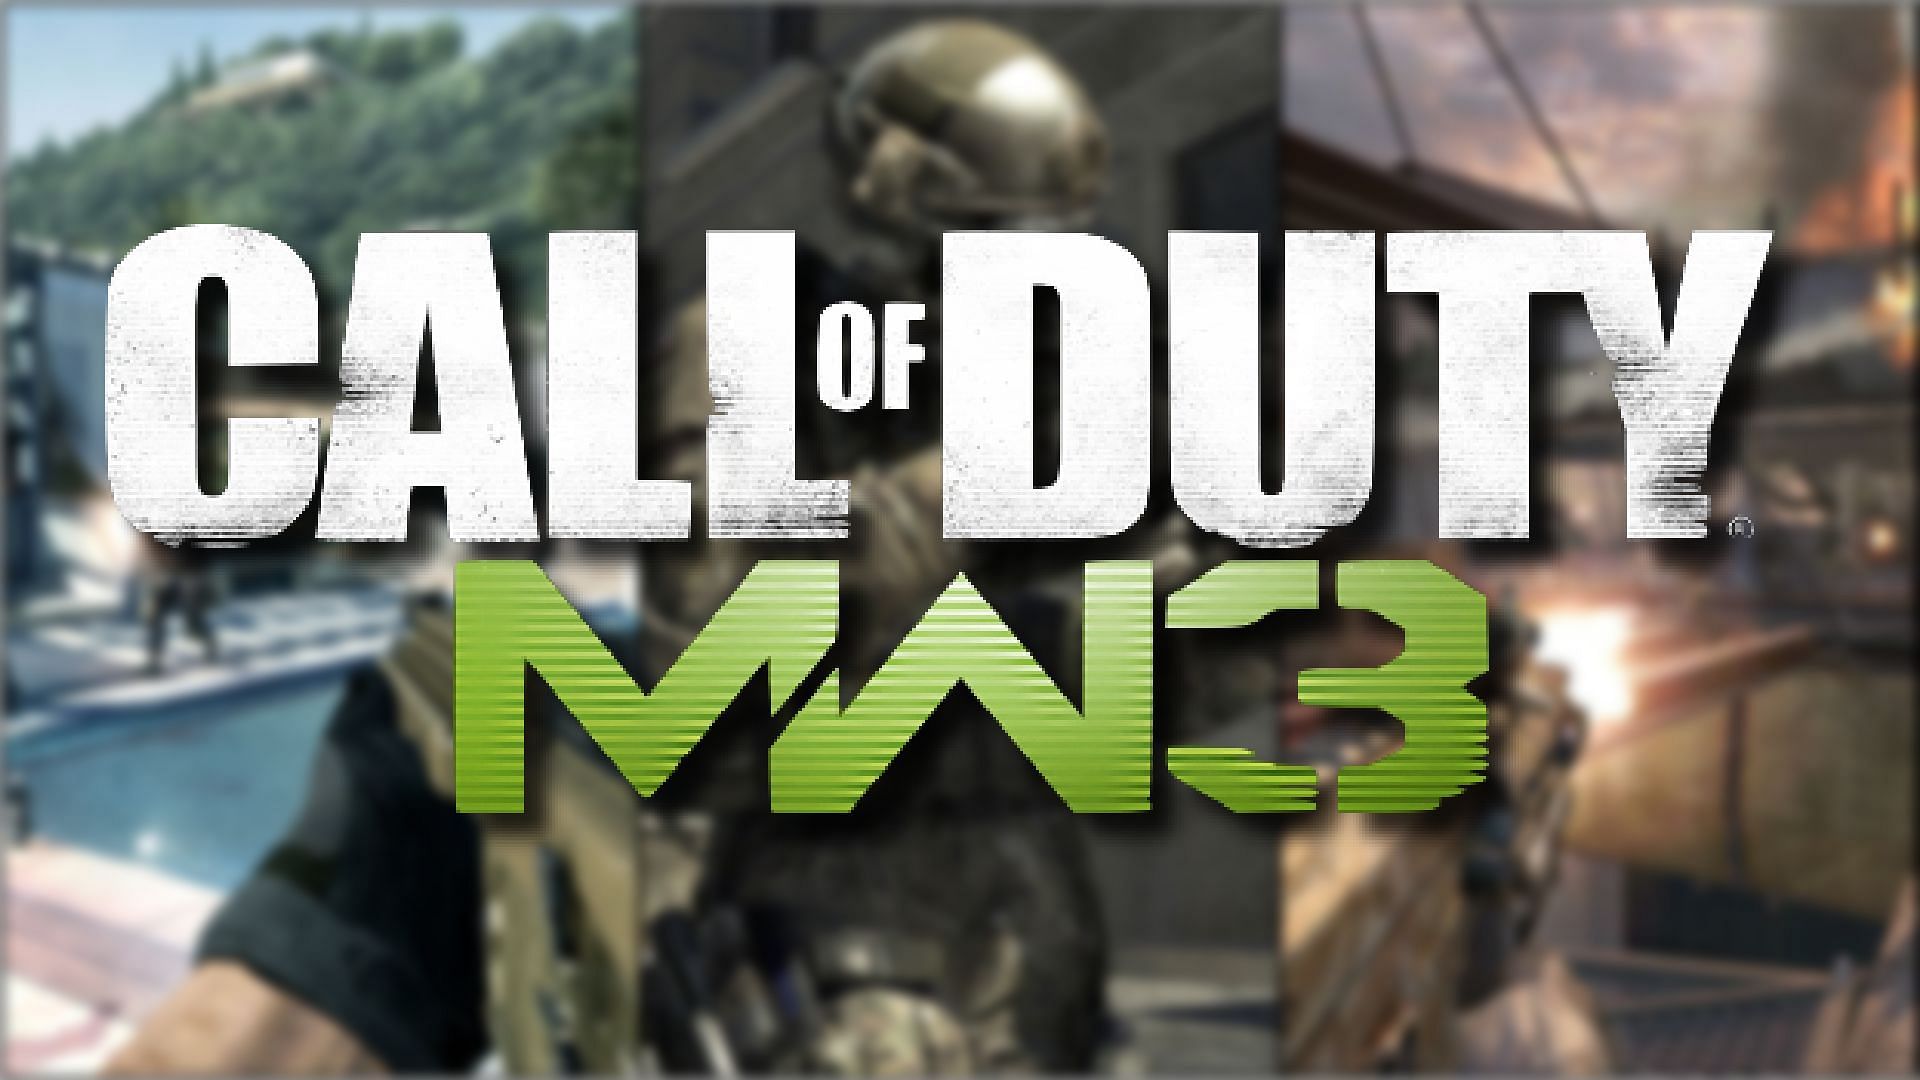 Call of Duty Modern Warfare 3 beta dates have been confirmed